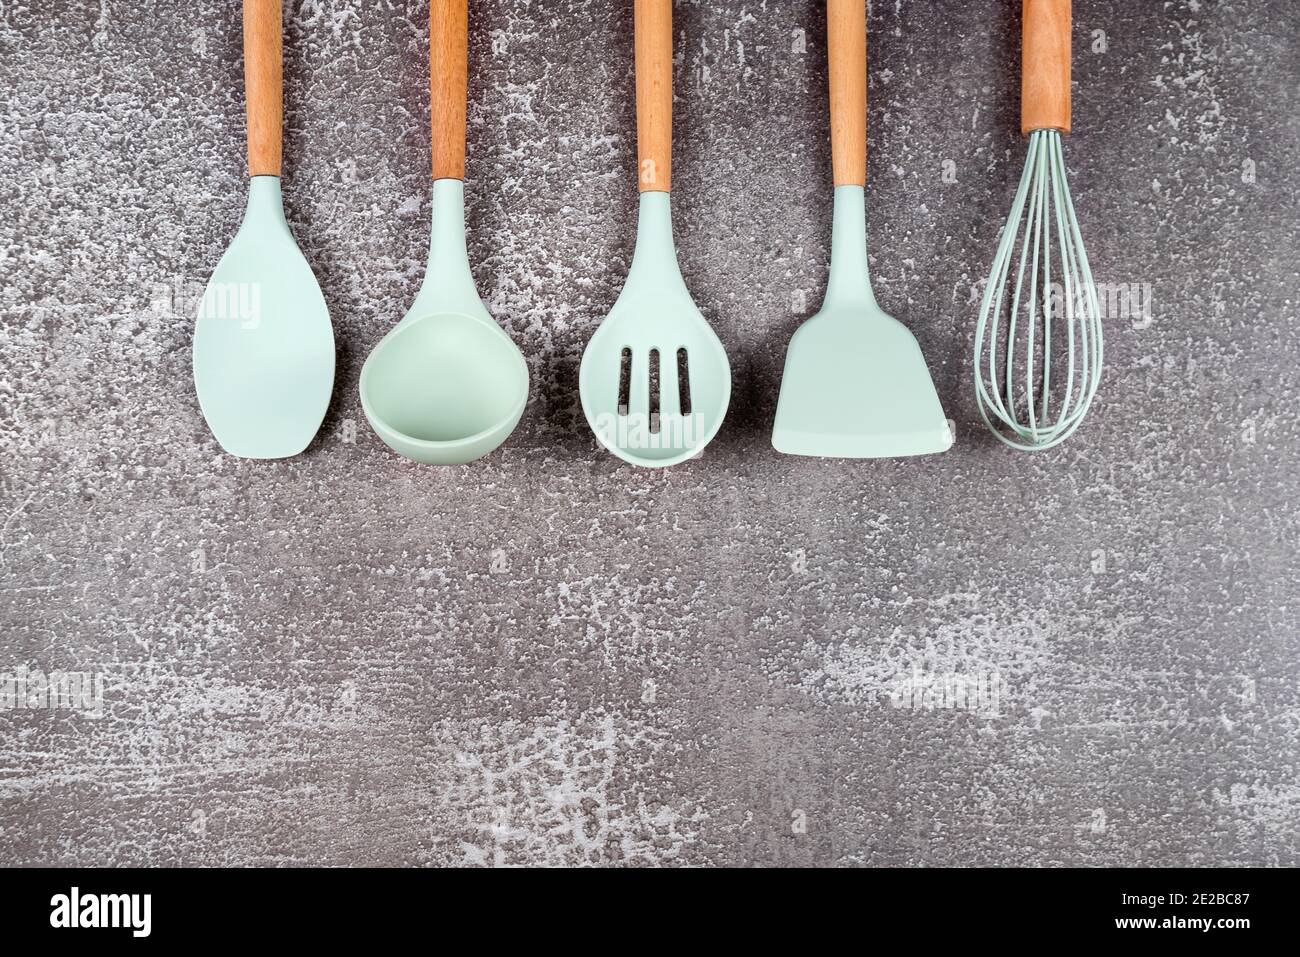 https://c8.alamy.com/comp/2E2BC87/kitchen-utensils-home-kitchen-tools-mint-rubber-accessories-on-dark-background-restaurant-cooking-culinary-kitchen-theme-silicone-spatulas-and-2E2BC87.jpg